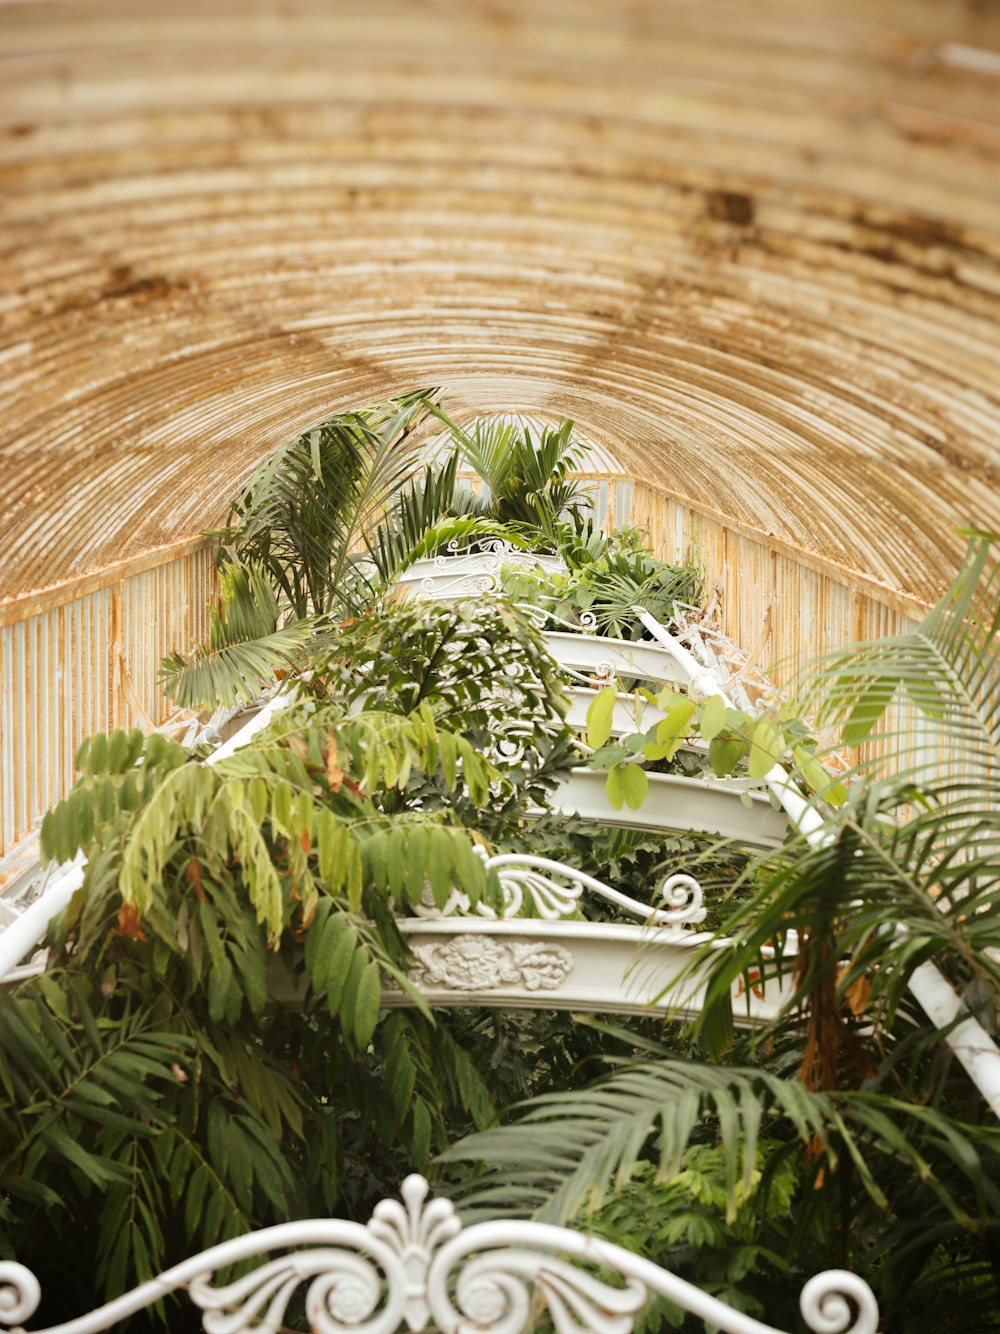 a view of the inside of a building with plants growing inside of it